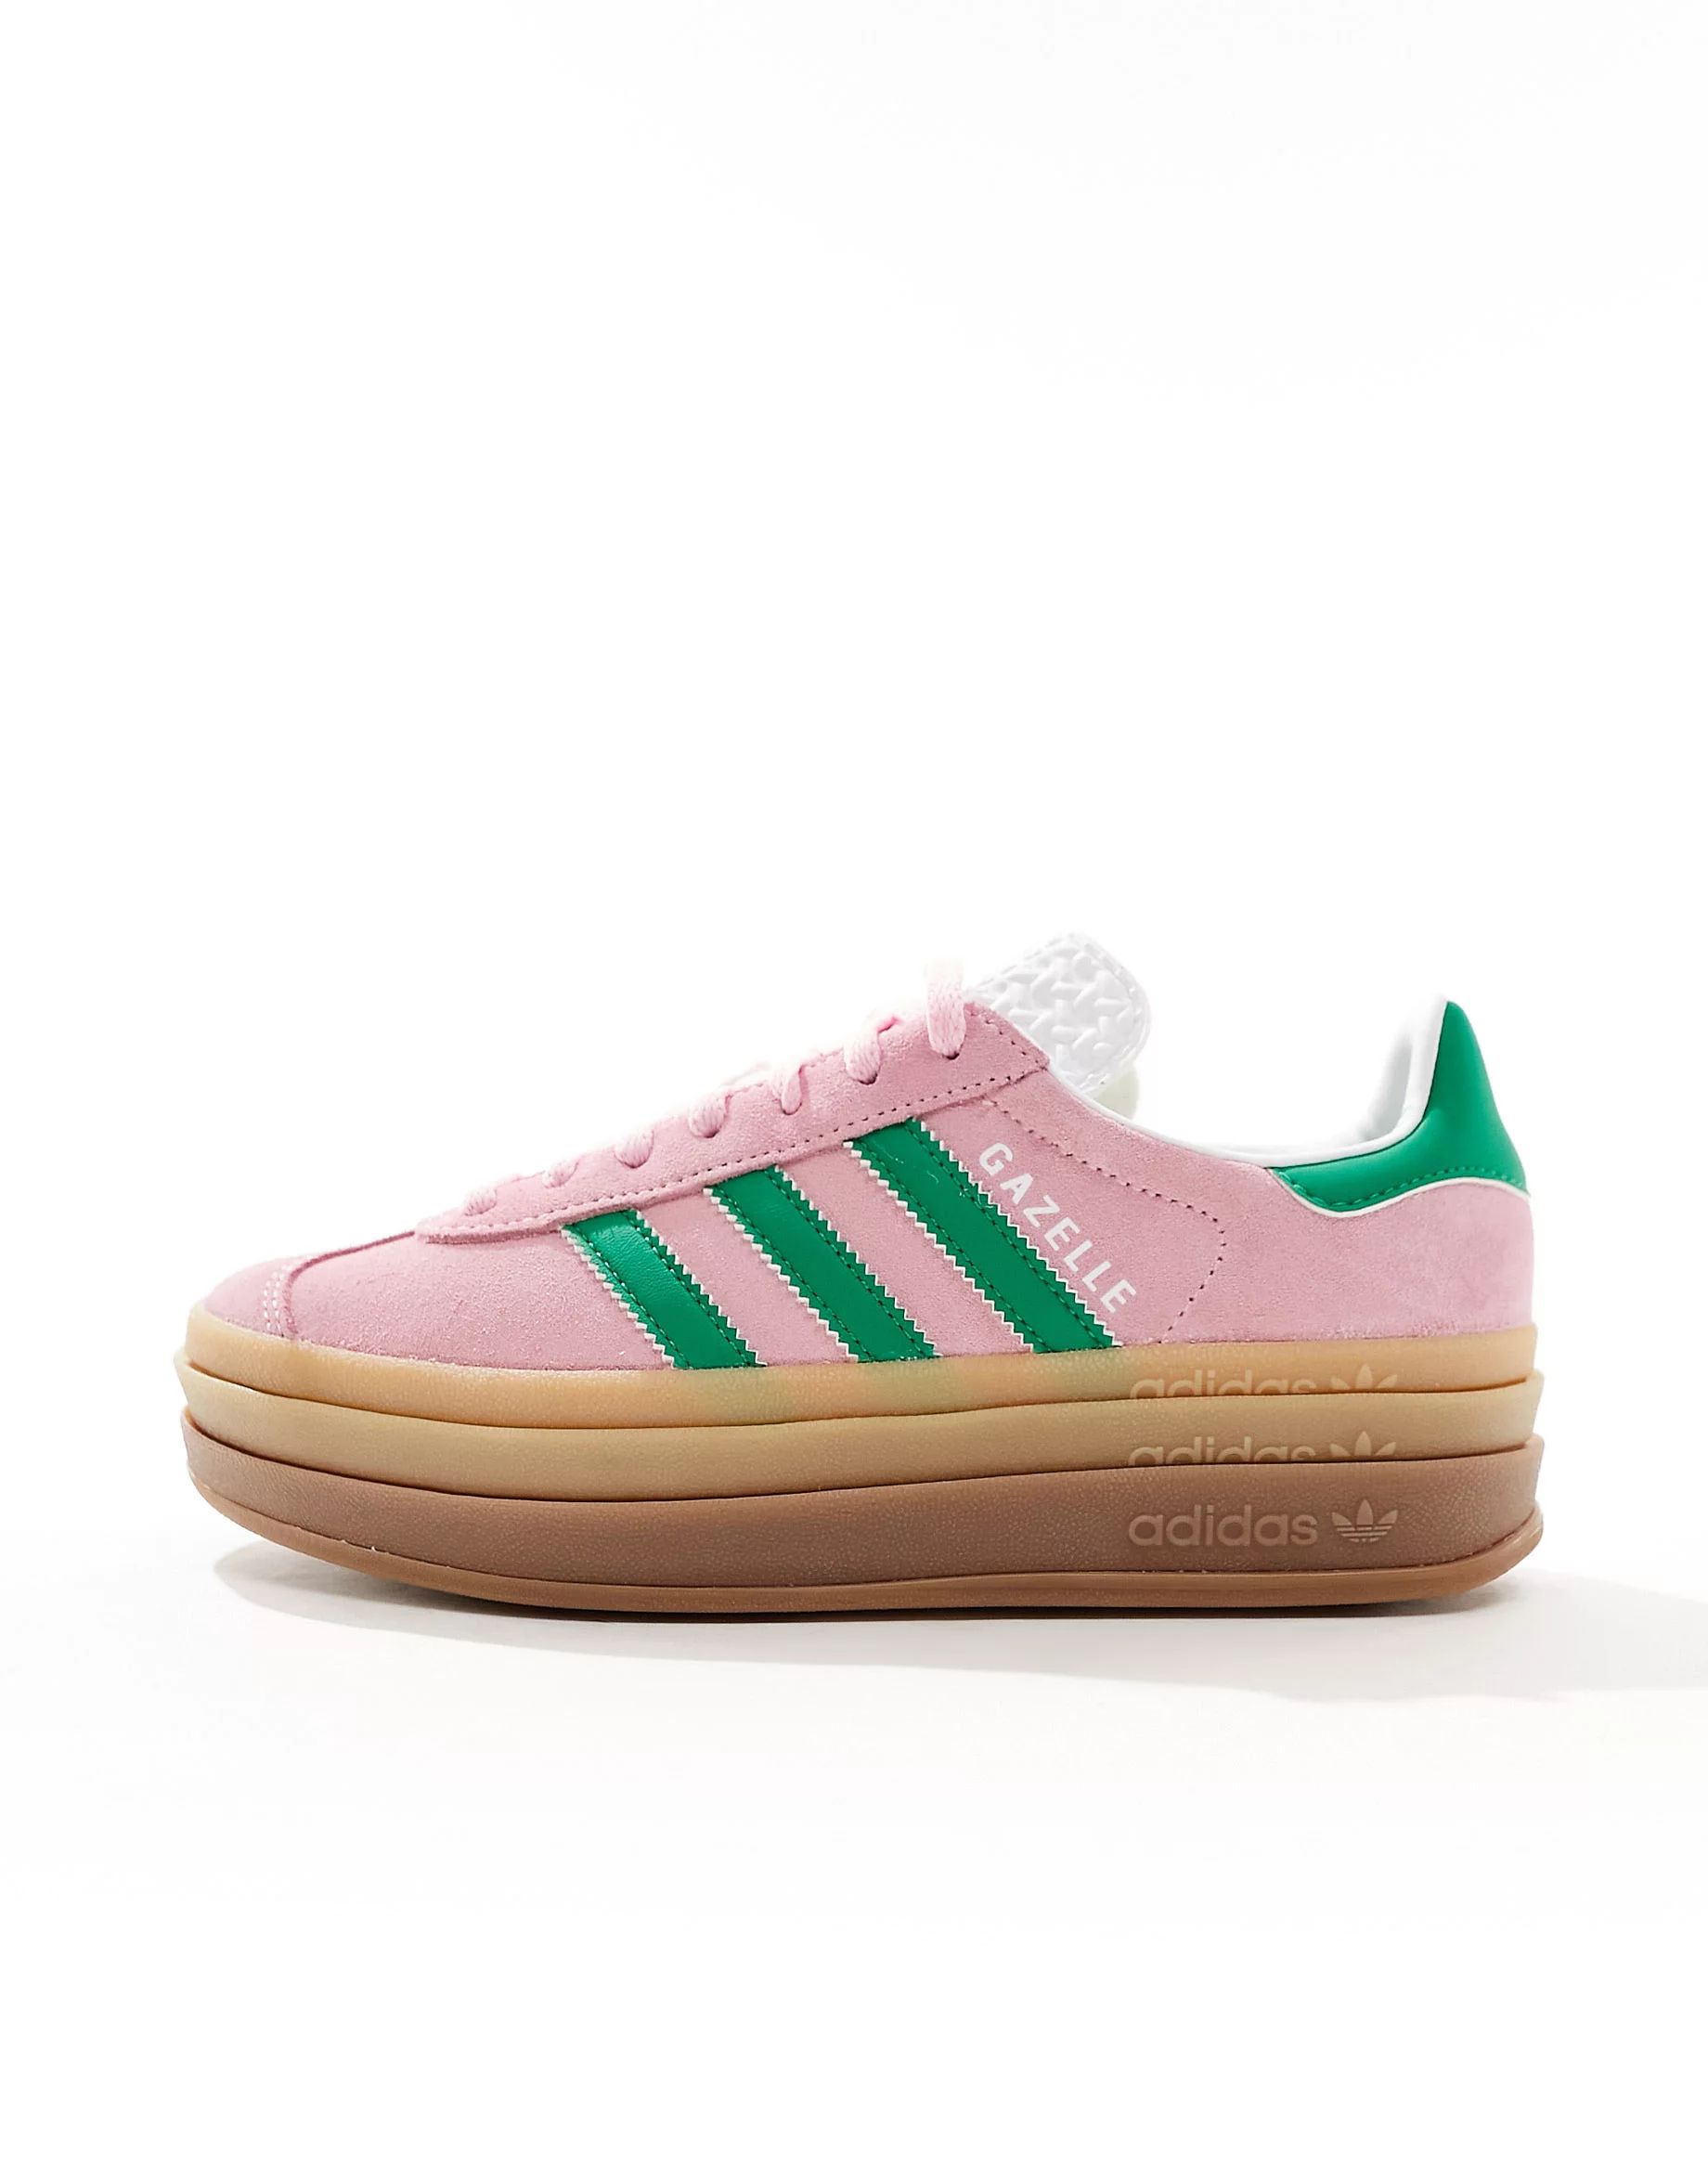 adidas Originals Gazelle Bold trainers in pastel pink and green | ASOS (Global)